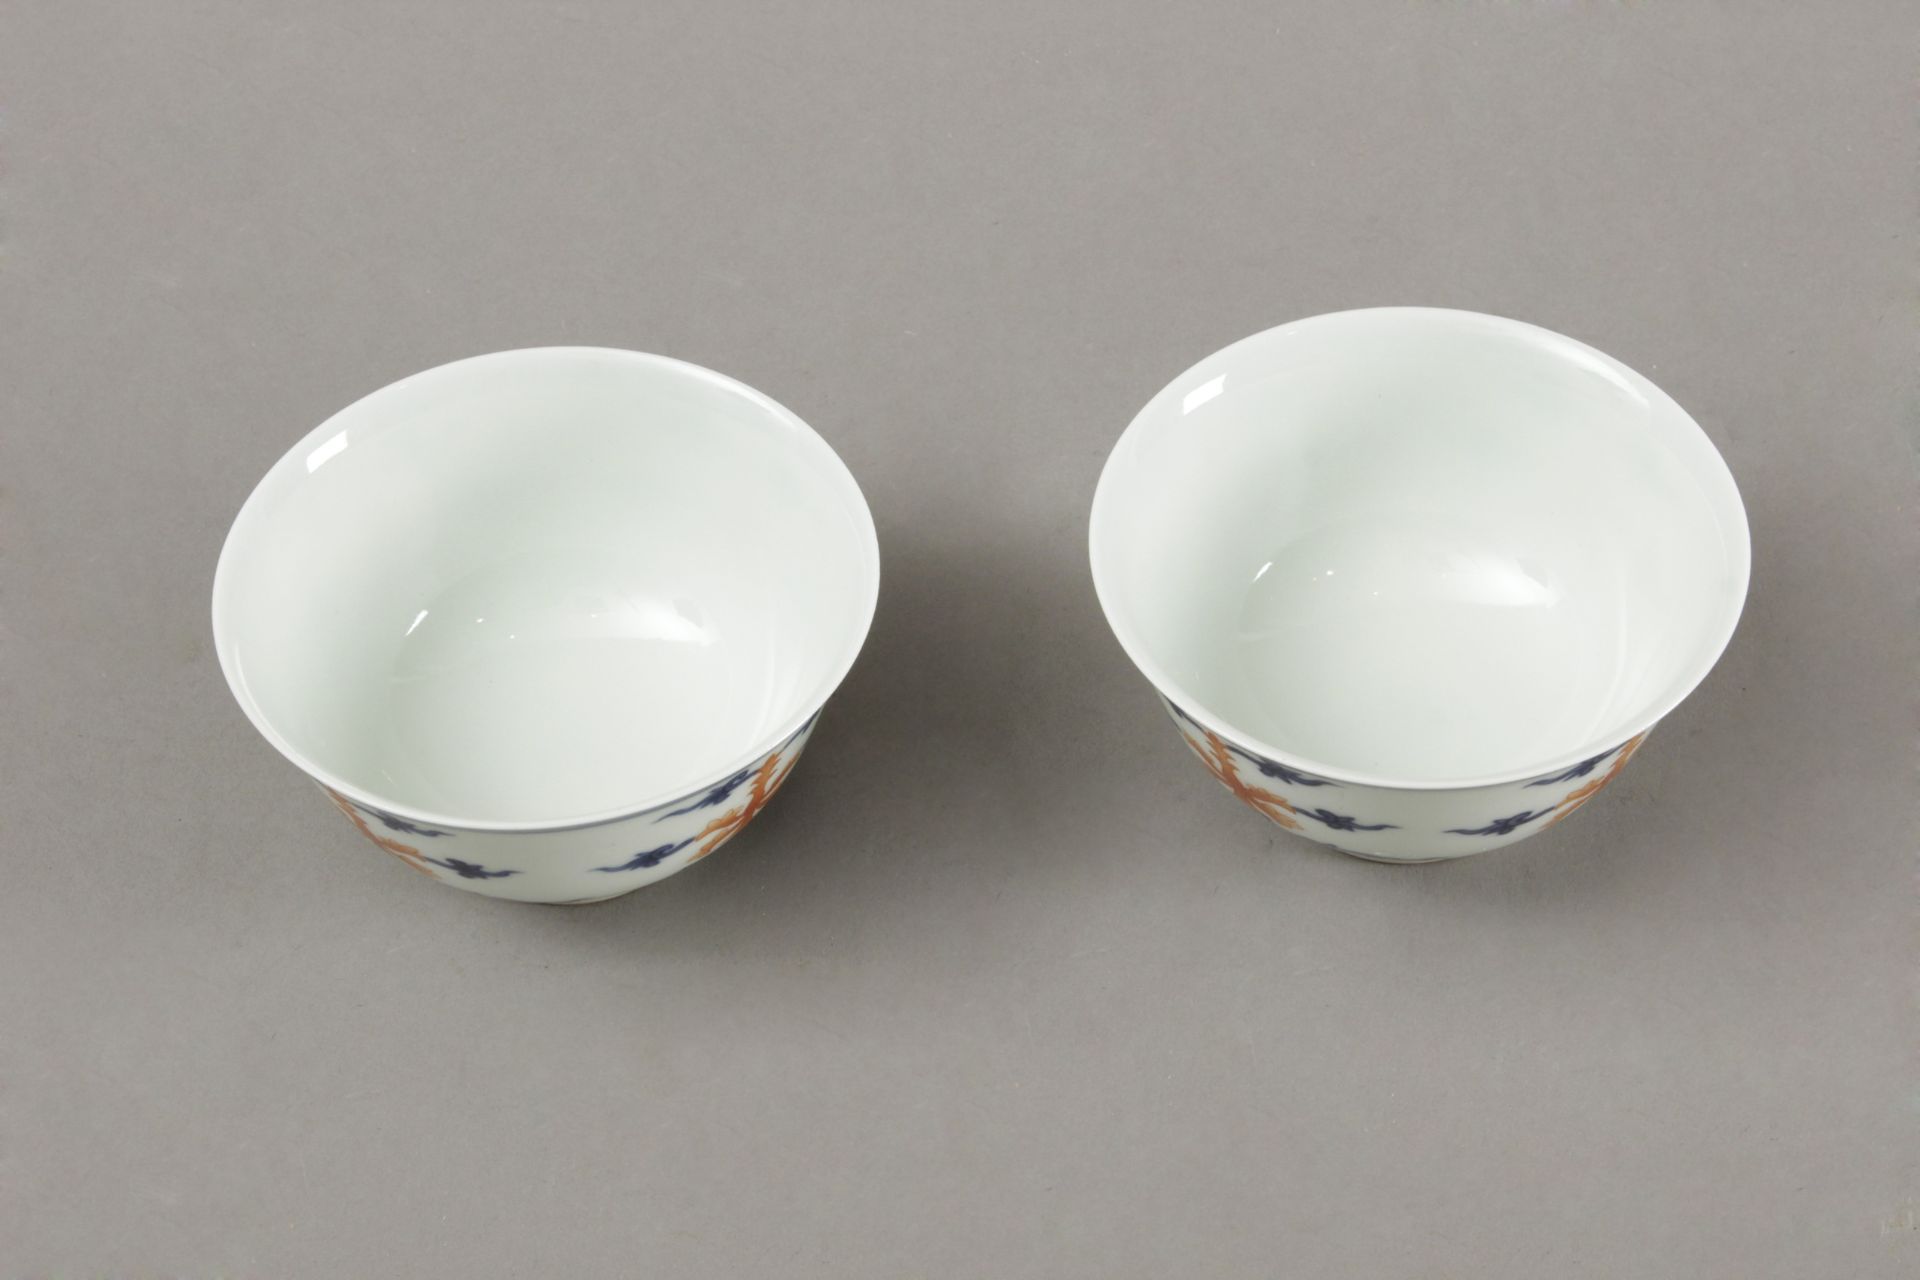 Pair of 20th century Chinese tea cups in blue and white porcelain - Image 3 of 4